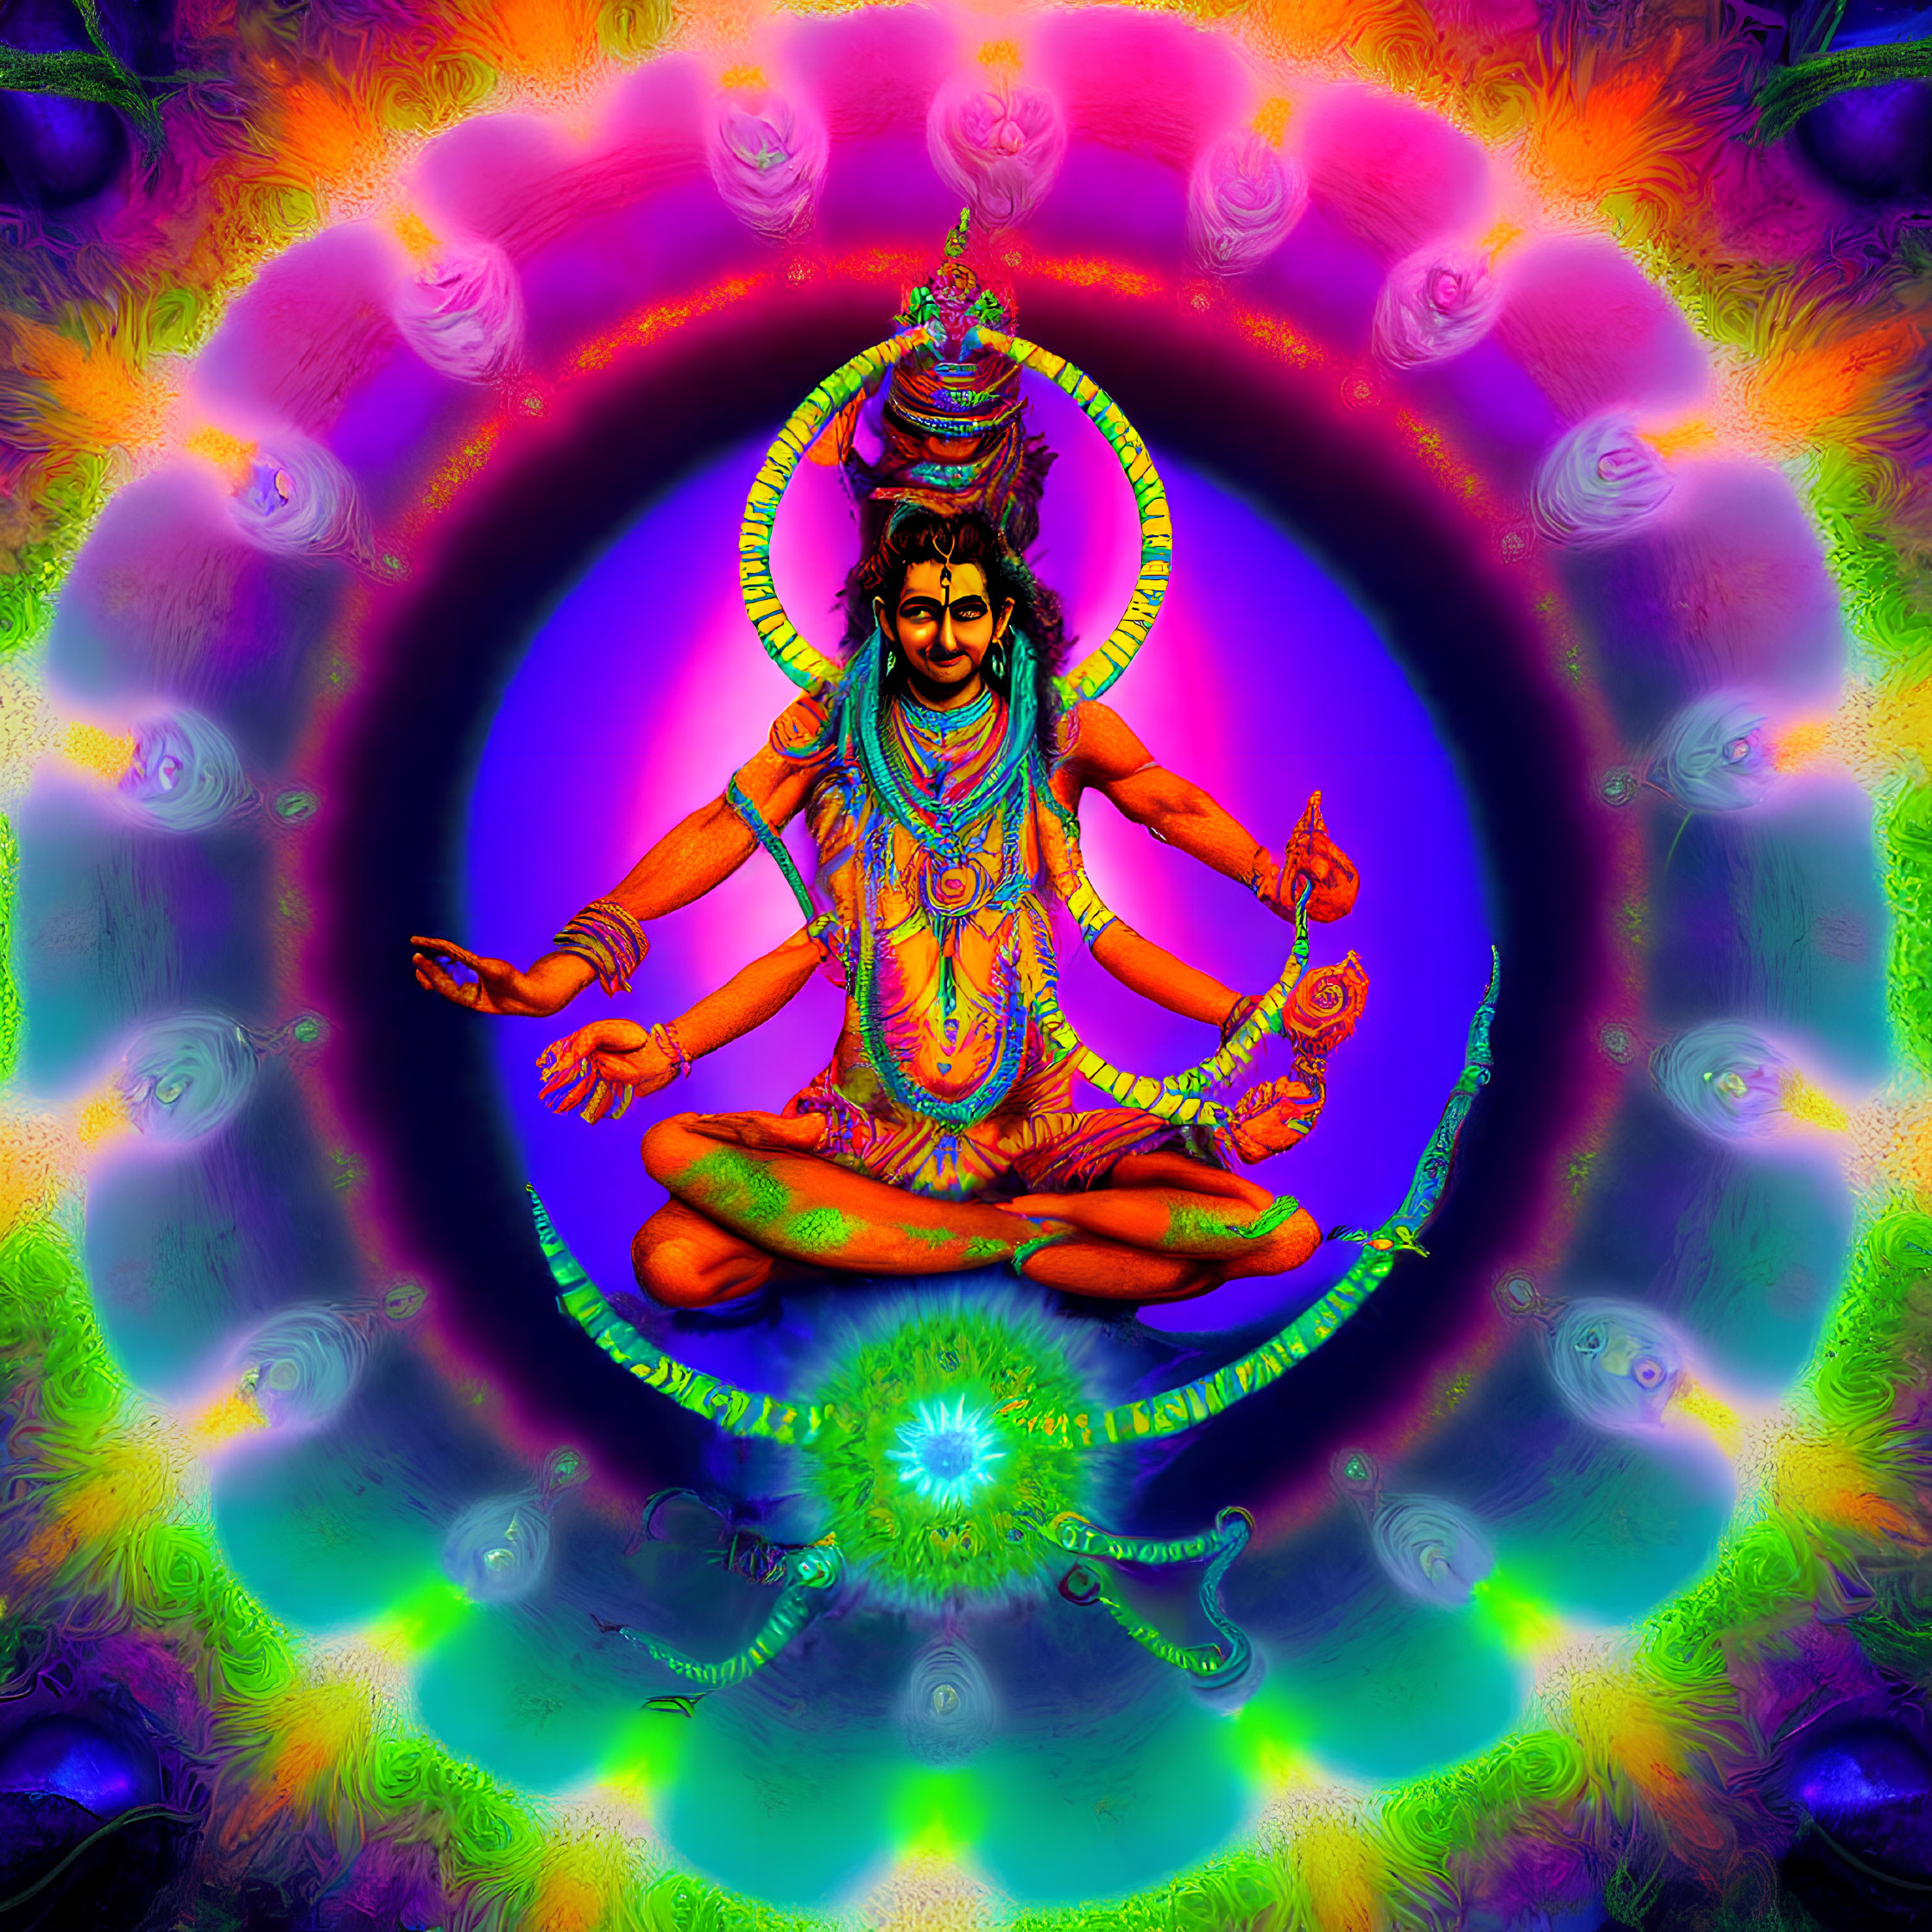 Colorful digital artwork of meditative figure with multiple arms and traditional adornments in psychedelic setting.